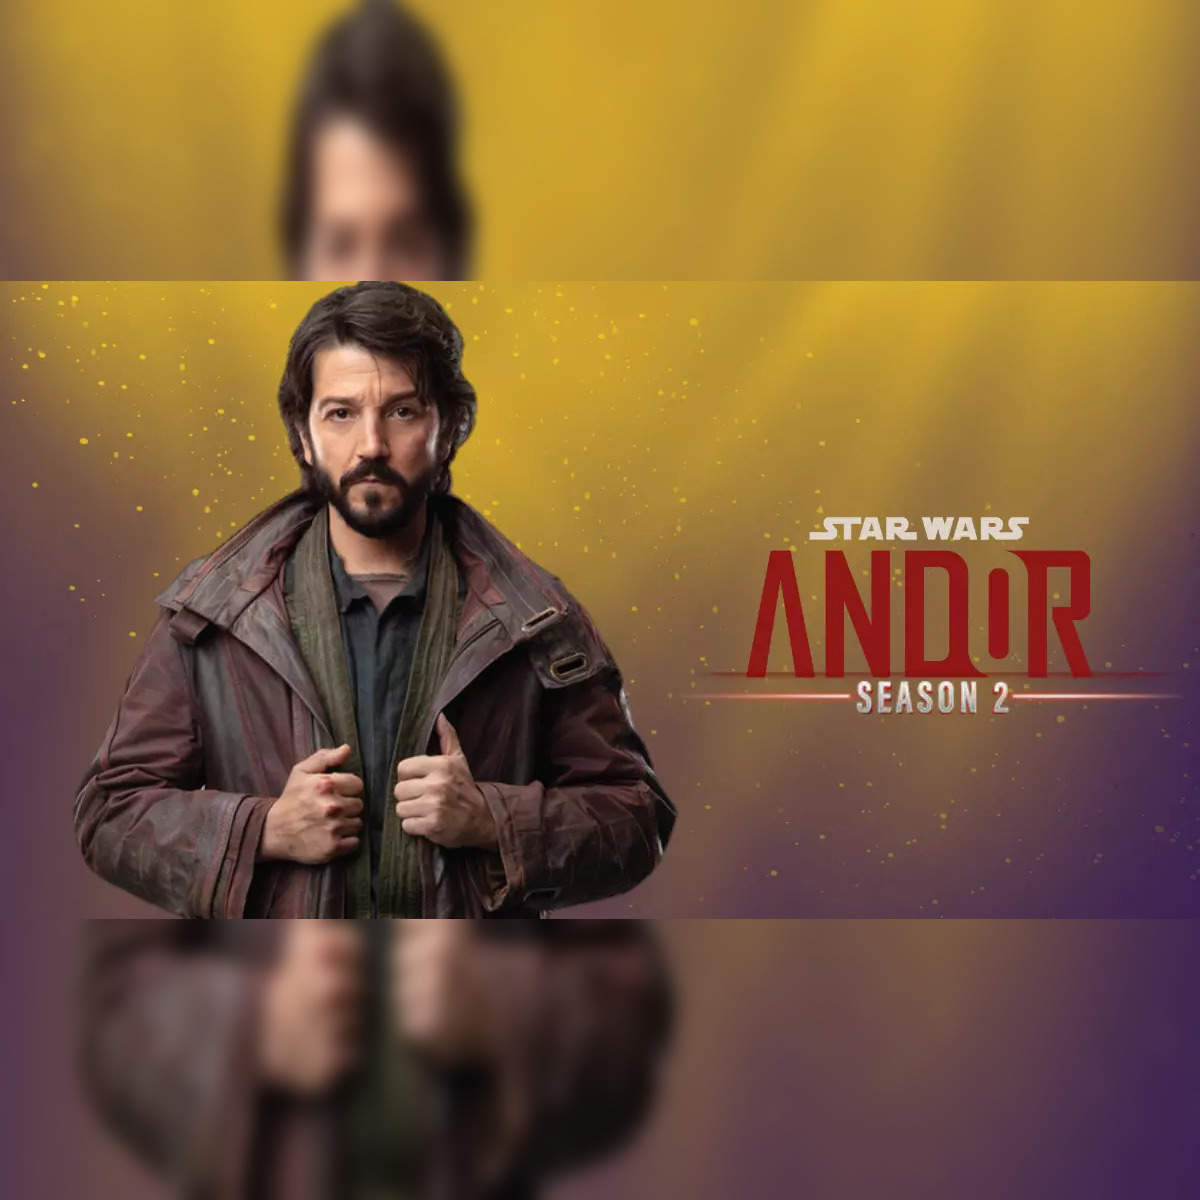 Andor Season 2 Will Cover the 'Three Days Before Rogue One' In Its